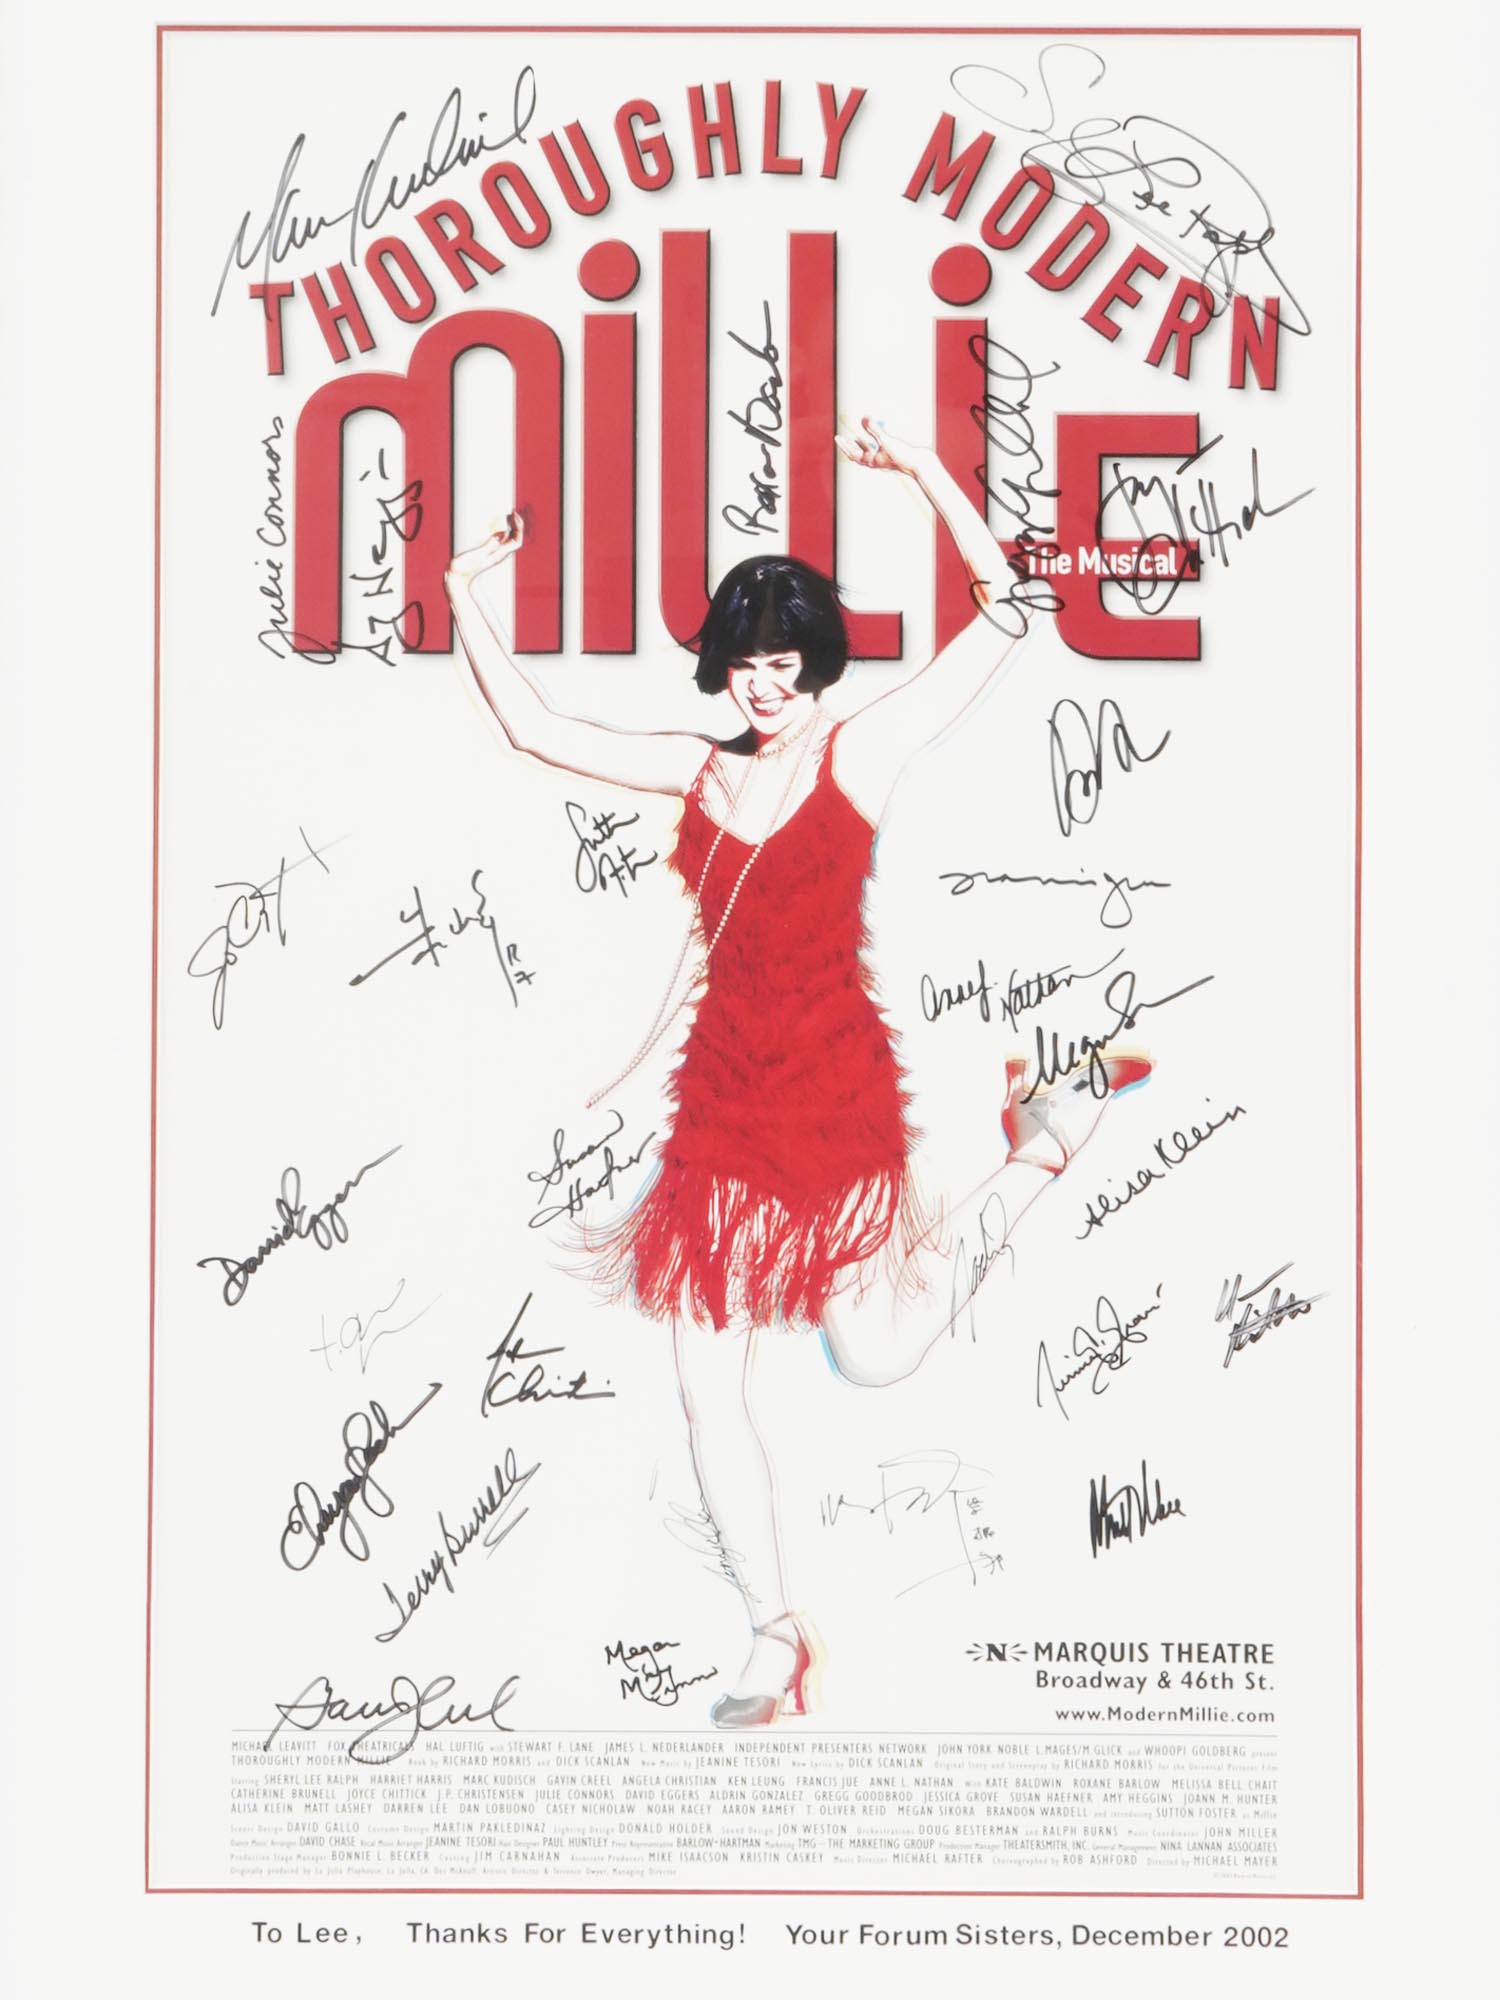 2002 MILLIE BROADWAY SHOW POSTER WITH AUTOGRAPHS PIC-1